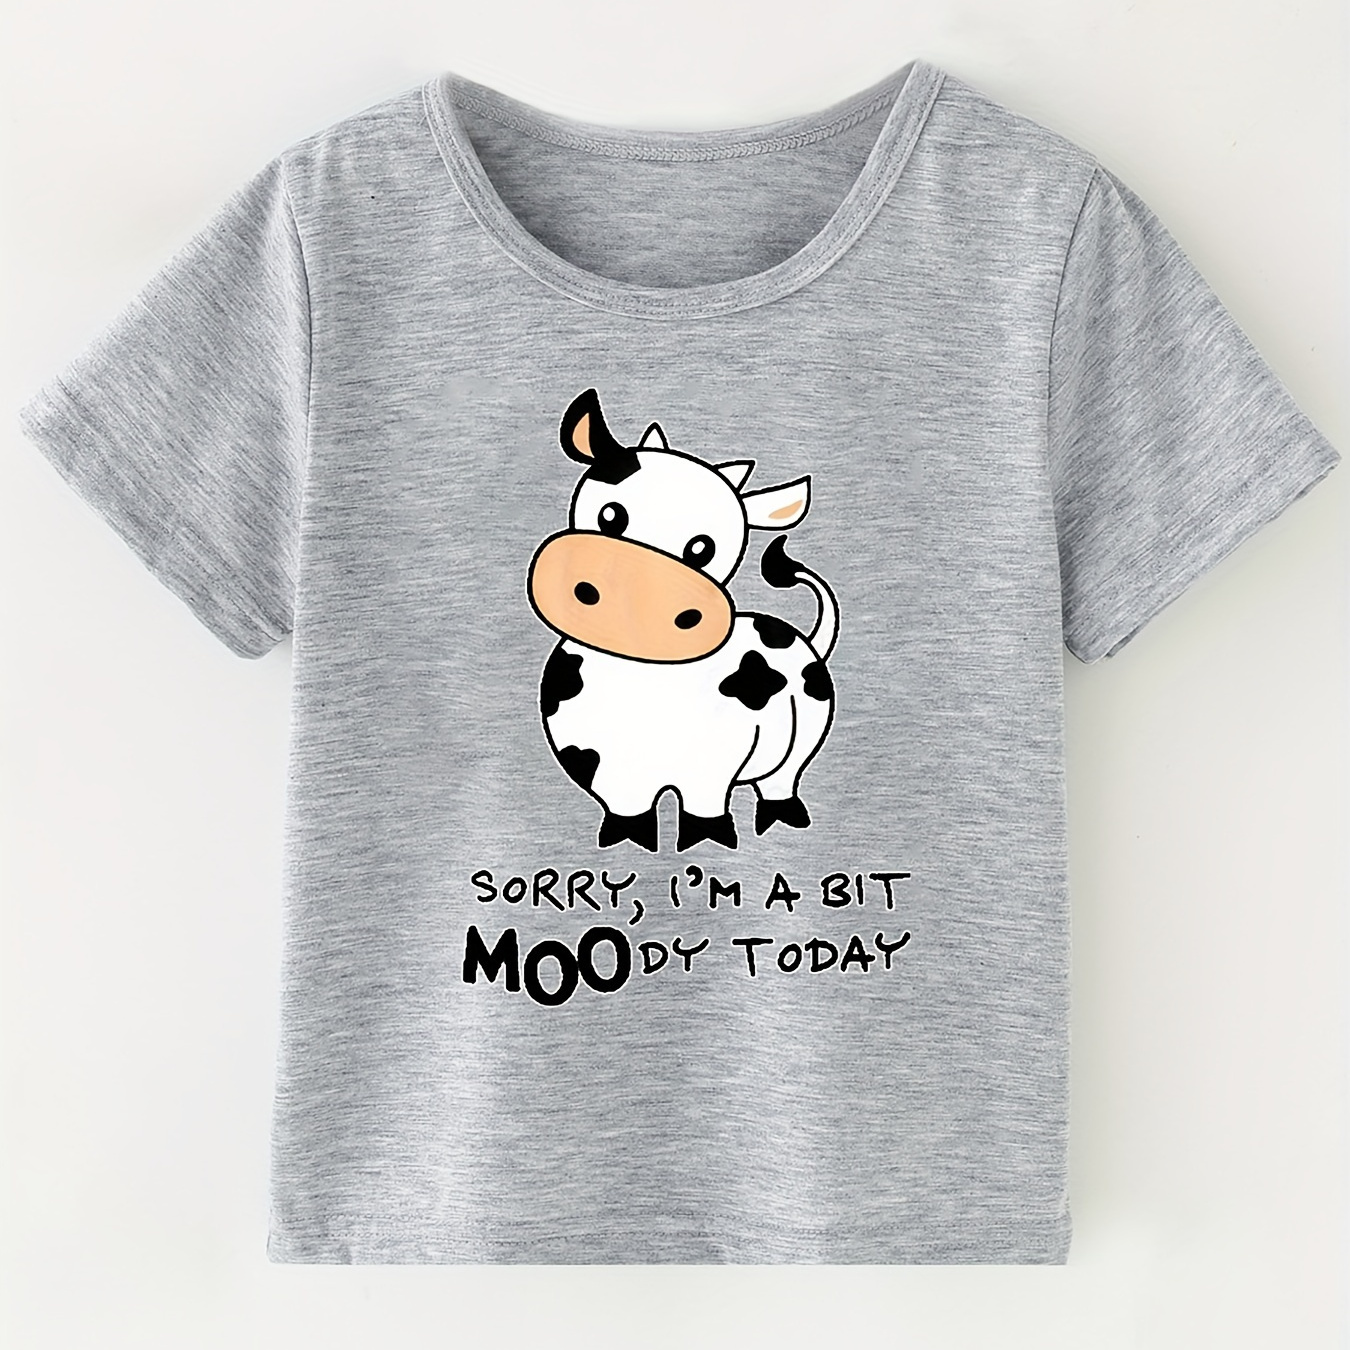 

Sorry, I'm A Bit Moody Today Letter And Cute Cow Print Boys Creative T-shirt, Casual Lightweight Comfy Short Sleeve Tee Tops, Kids Clothings For Summer